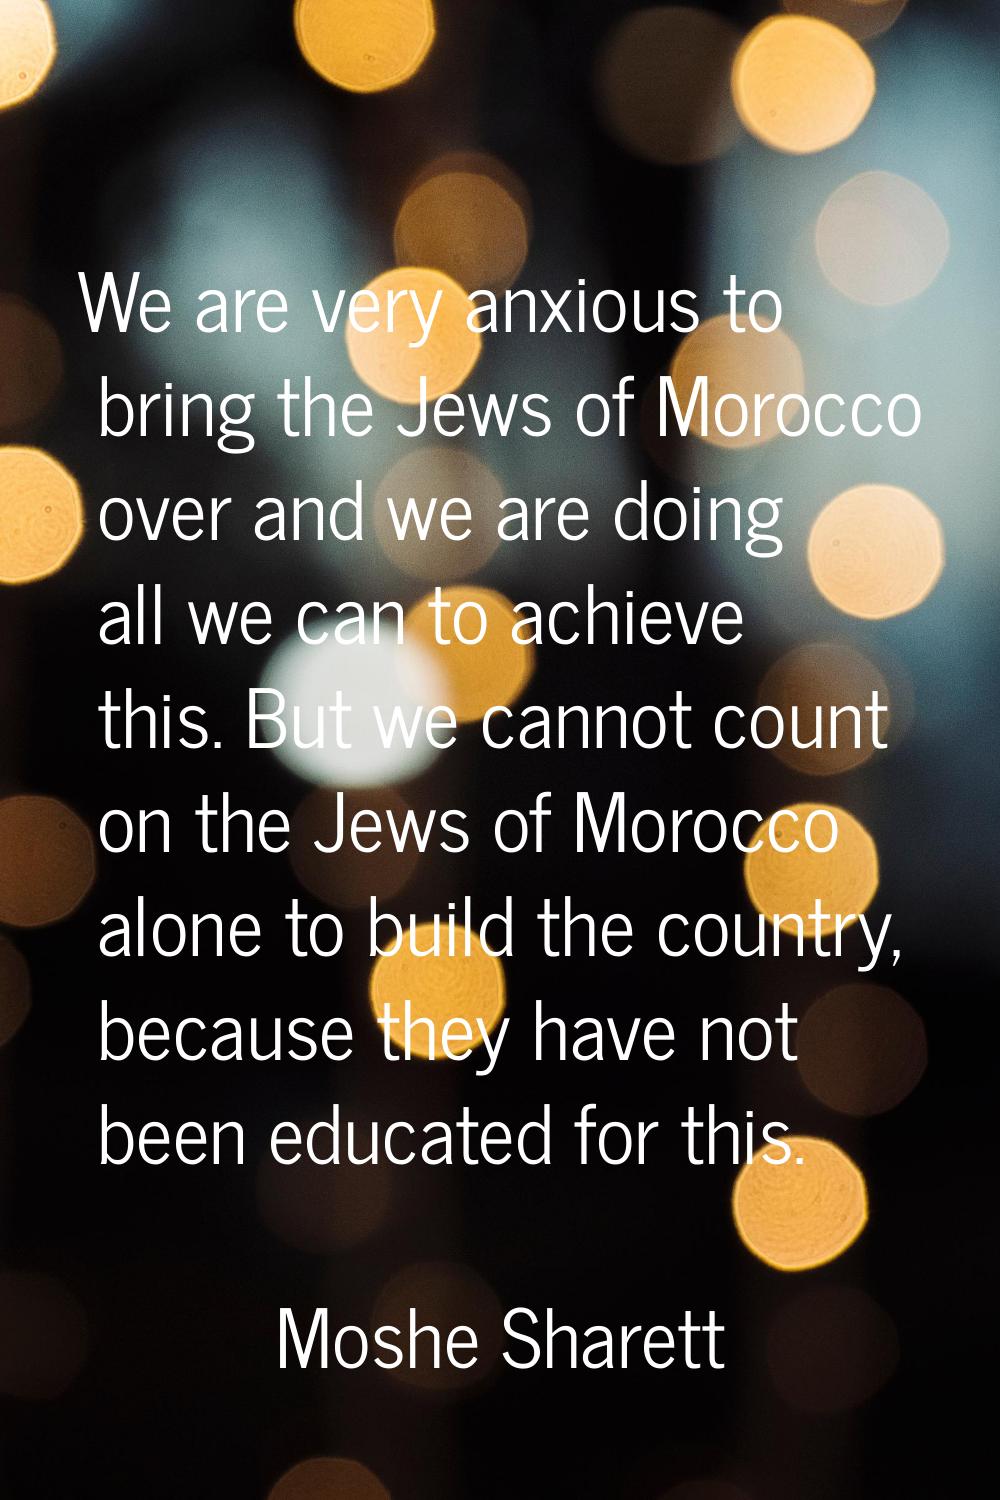 We are very anxious to bring the Jews of Morocco over and we are doing all we can to achieve this. 